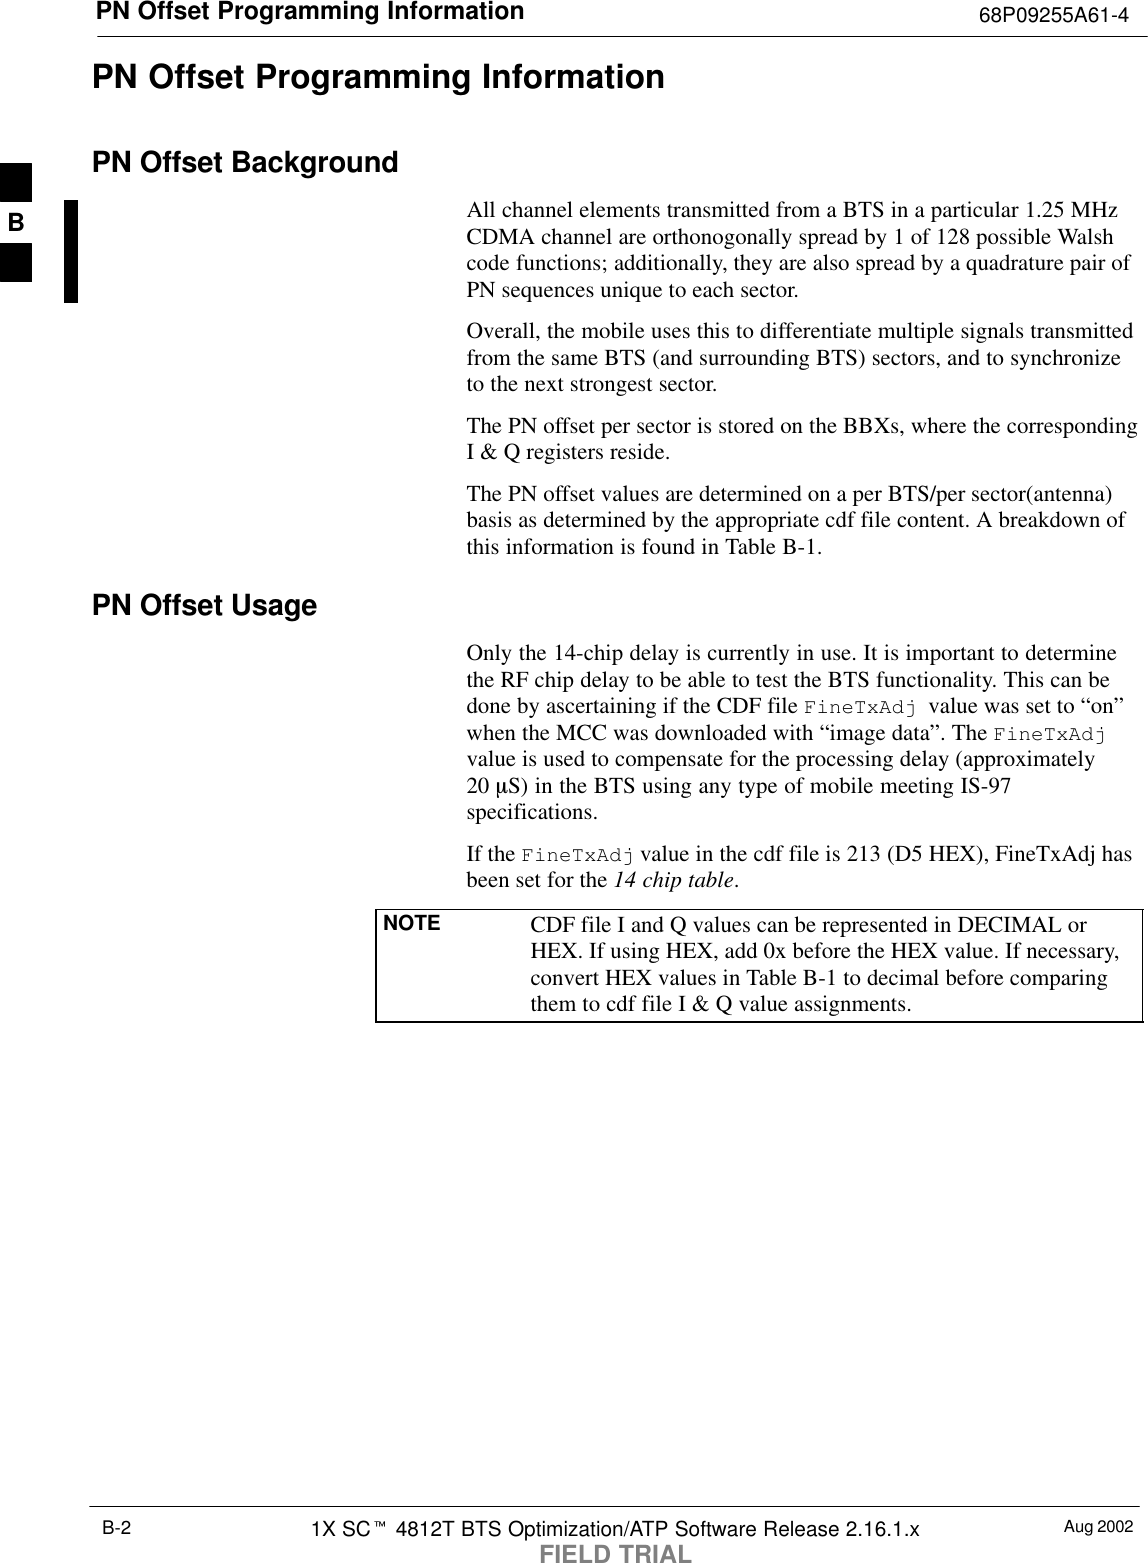 PN Offset Programming Information 68P09255A61-4Aug 20021X SCt 4812T BTS Optimization/ATP Software Release 2.16.1.xFIELD TRIALB-2PN Offset Programming InformationPN Offset BackgroundAll channel elements transmitted from a BTS in a particular 1.25 MHzCDMA channel are orthonogonally spread by 1 of 128 possible Walshcode functions; additionally, they are also spread by a quadrature pair ofPN sequences unique to each sector.Overall, the mobile uses this to differentiate multiple signals transmittedfrom the same BTS (and surrounding BTS) sectors, and to synchronizeto the next strongest sector.The PN offset per sector is stored on the BBXs, where the correspondingI &amp; Q registers reside.The PN offset values are determined on a per BTS/per sector(antenna)basis as determined by the appropriate cdf file content. A breakdown ofthis information is found in Table B-1.PN Offset UsageOnly the 14-chip delay is currently in use. It is important to determinethe RF chip delay to be able to test the BTS functionality. This can bedone by ascertaining if the CDF file FineTxAdj  value was set to “on”when the MCC was downloaded with “image data”. The FineTxAdjvalue is used to compensate for the processing delay (approximately20 mS) in the BTS using any type of mobile meeting IS-97specifications.If the FineTxAdj value in the cdf file is 213 (D5 HEX), FineTxAdj hasbeen set for the 14 chip table.NOTE CDF file I and Q values can be represented in DECIMAL orHEX. If using HEX, add 0x before the HEX value. If necessary,convert HEX values in Table B-1 to decimal before comparingthem to cdf file I &amp; Q value assignments.B